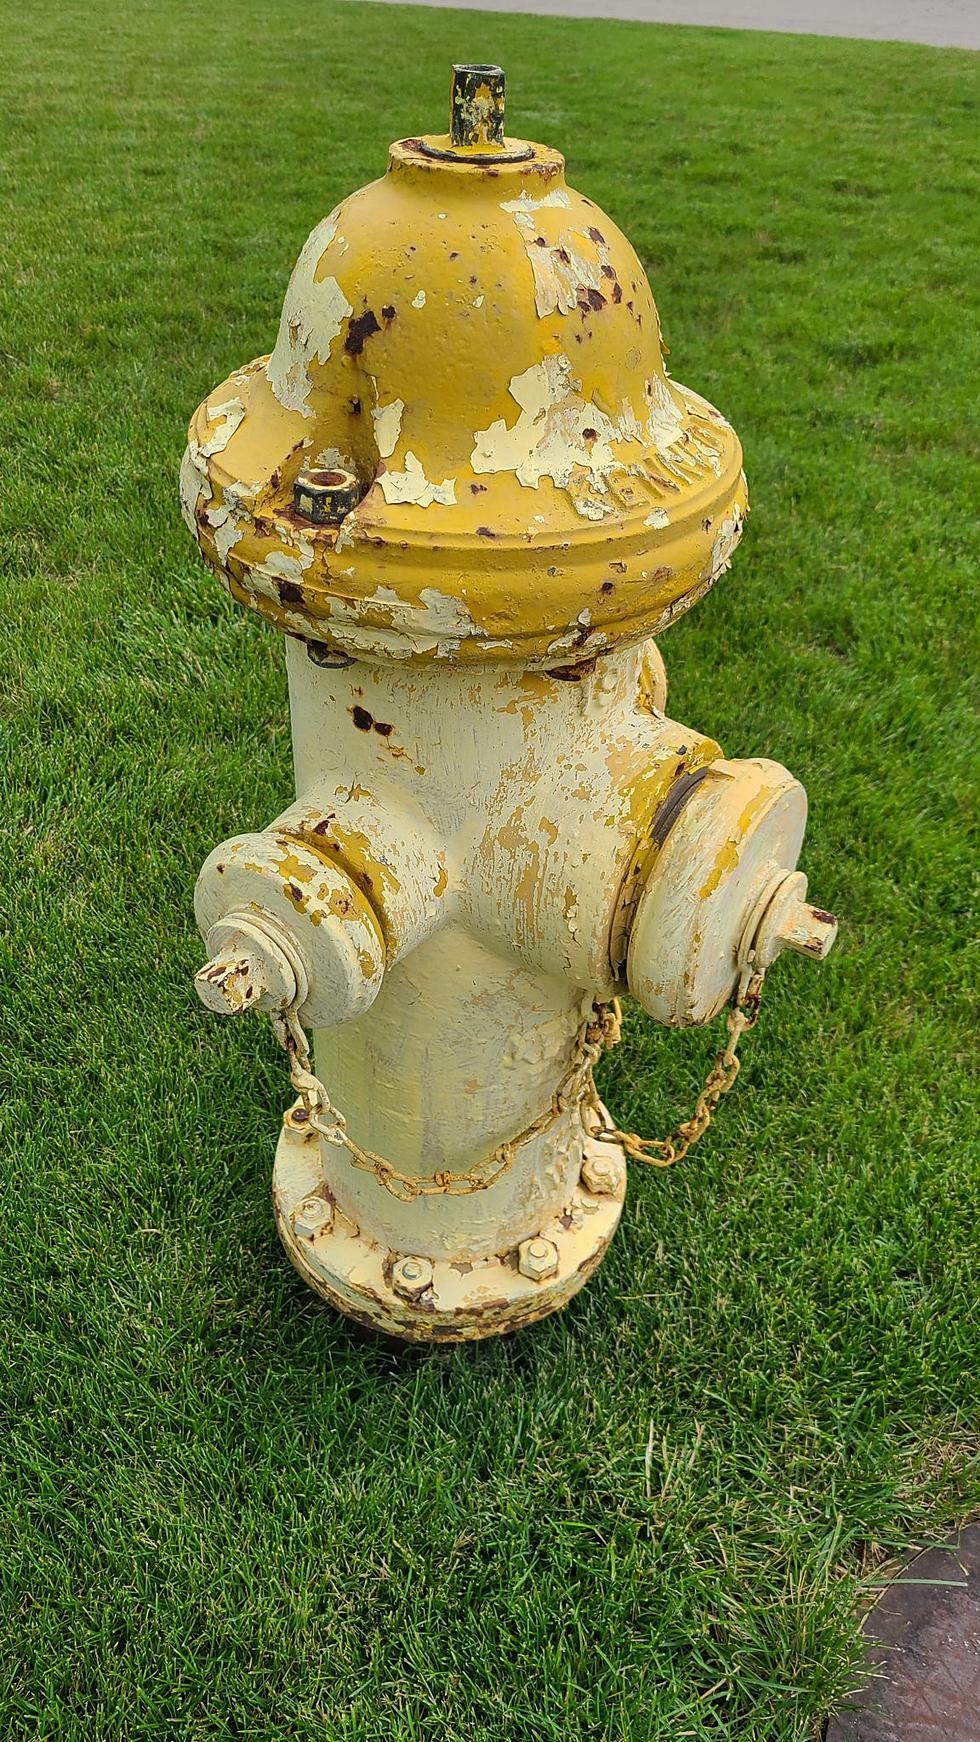 Can Rockford Residents Paint The Fire Hydrant In Their Yard?